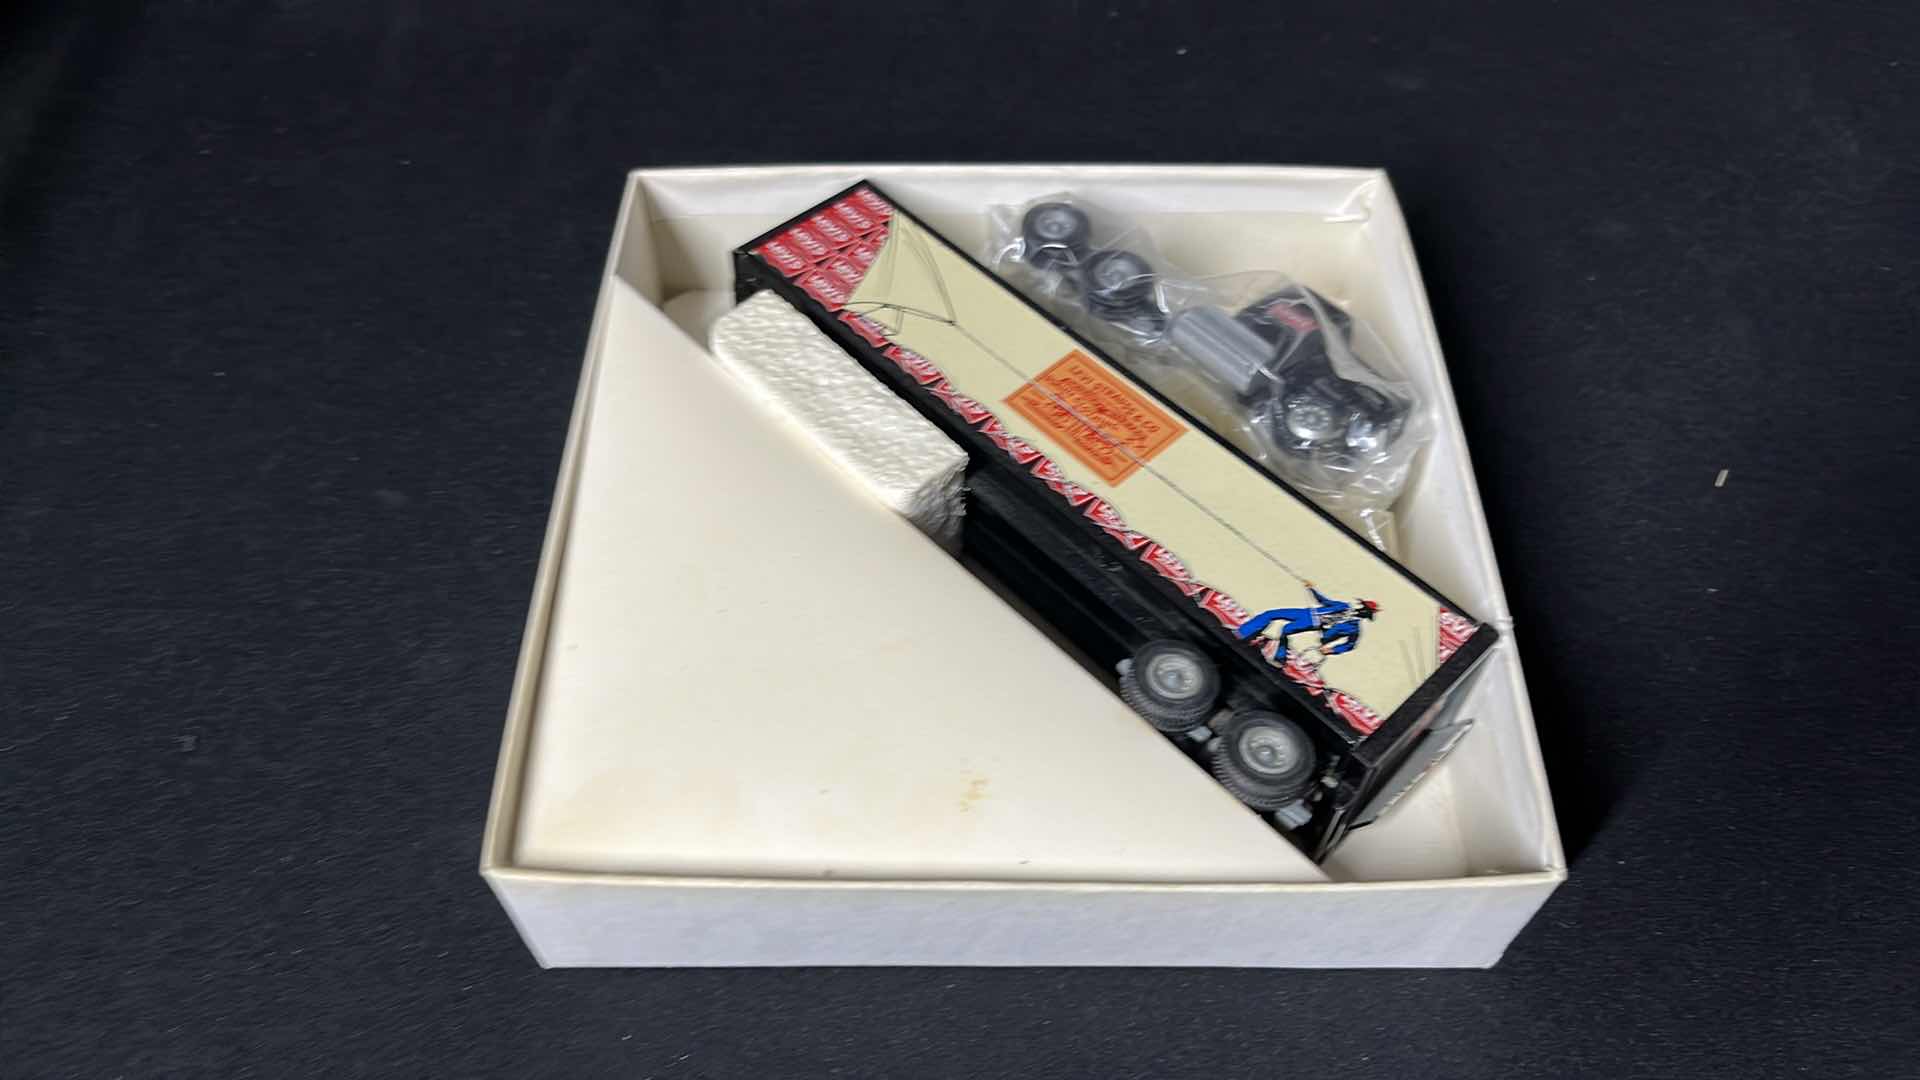 Photo 6 of WINROSS DIE-CAST METAL LEVI’S STRAUSS & CO. TRACTOR TRAILER